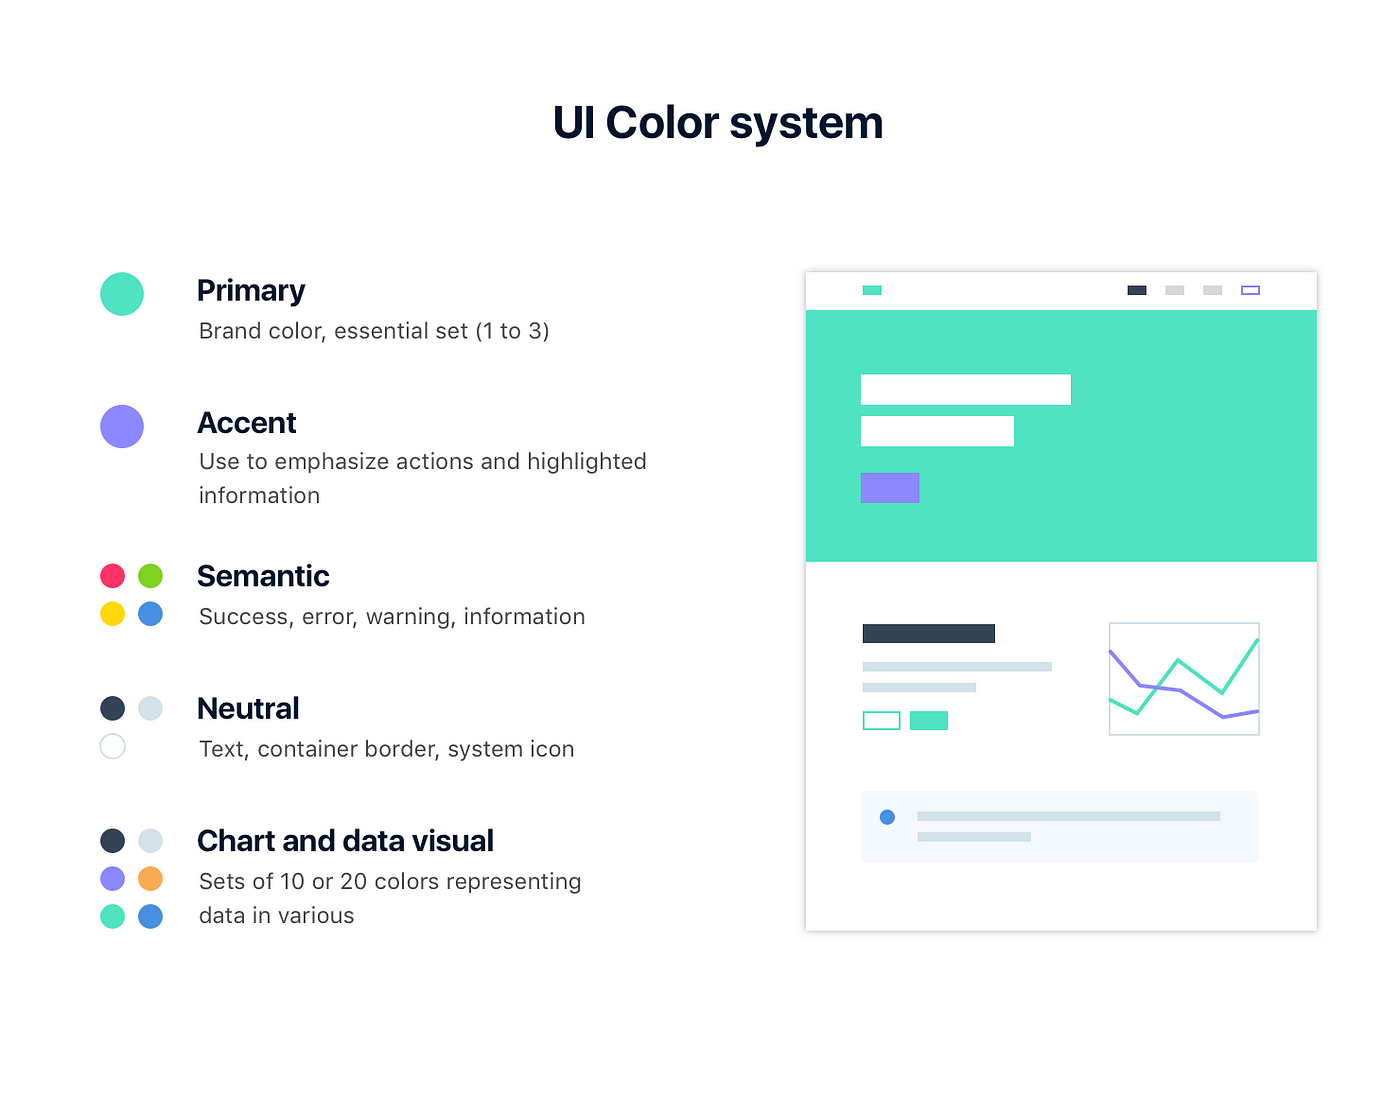 How to define color usage through semantic sets for design systems